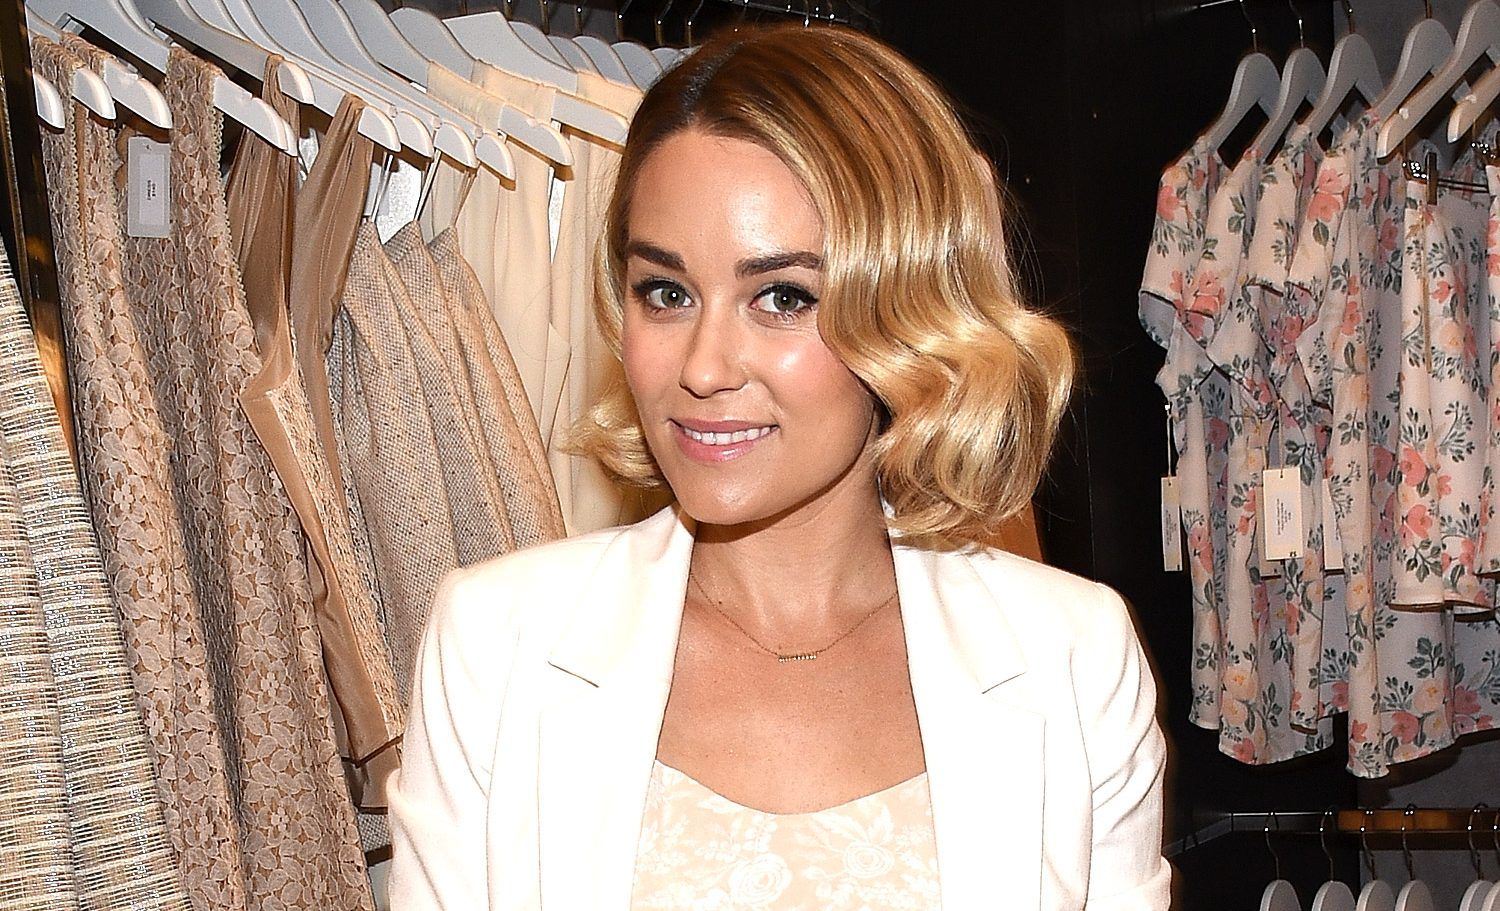 Ep. 247: Lauren Conrad on How to Develop Your Style & Your Career